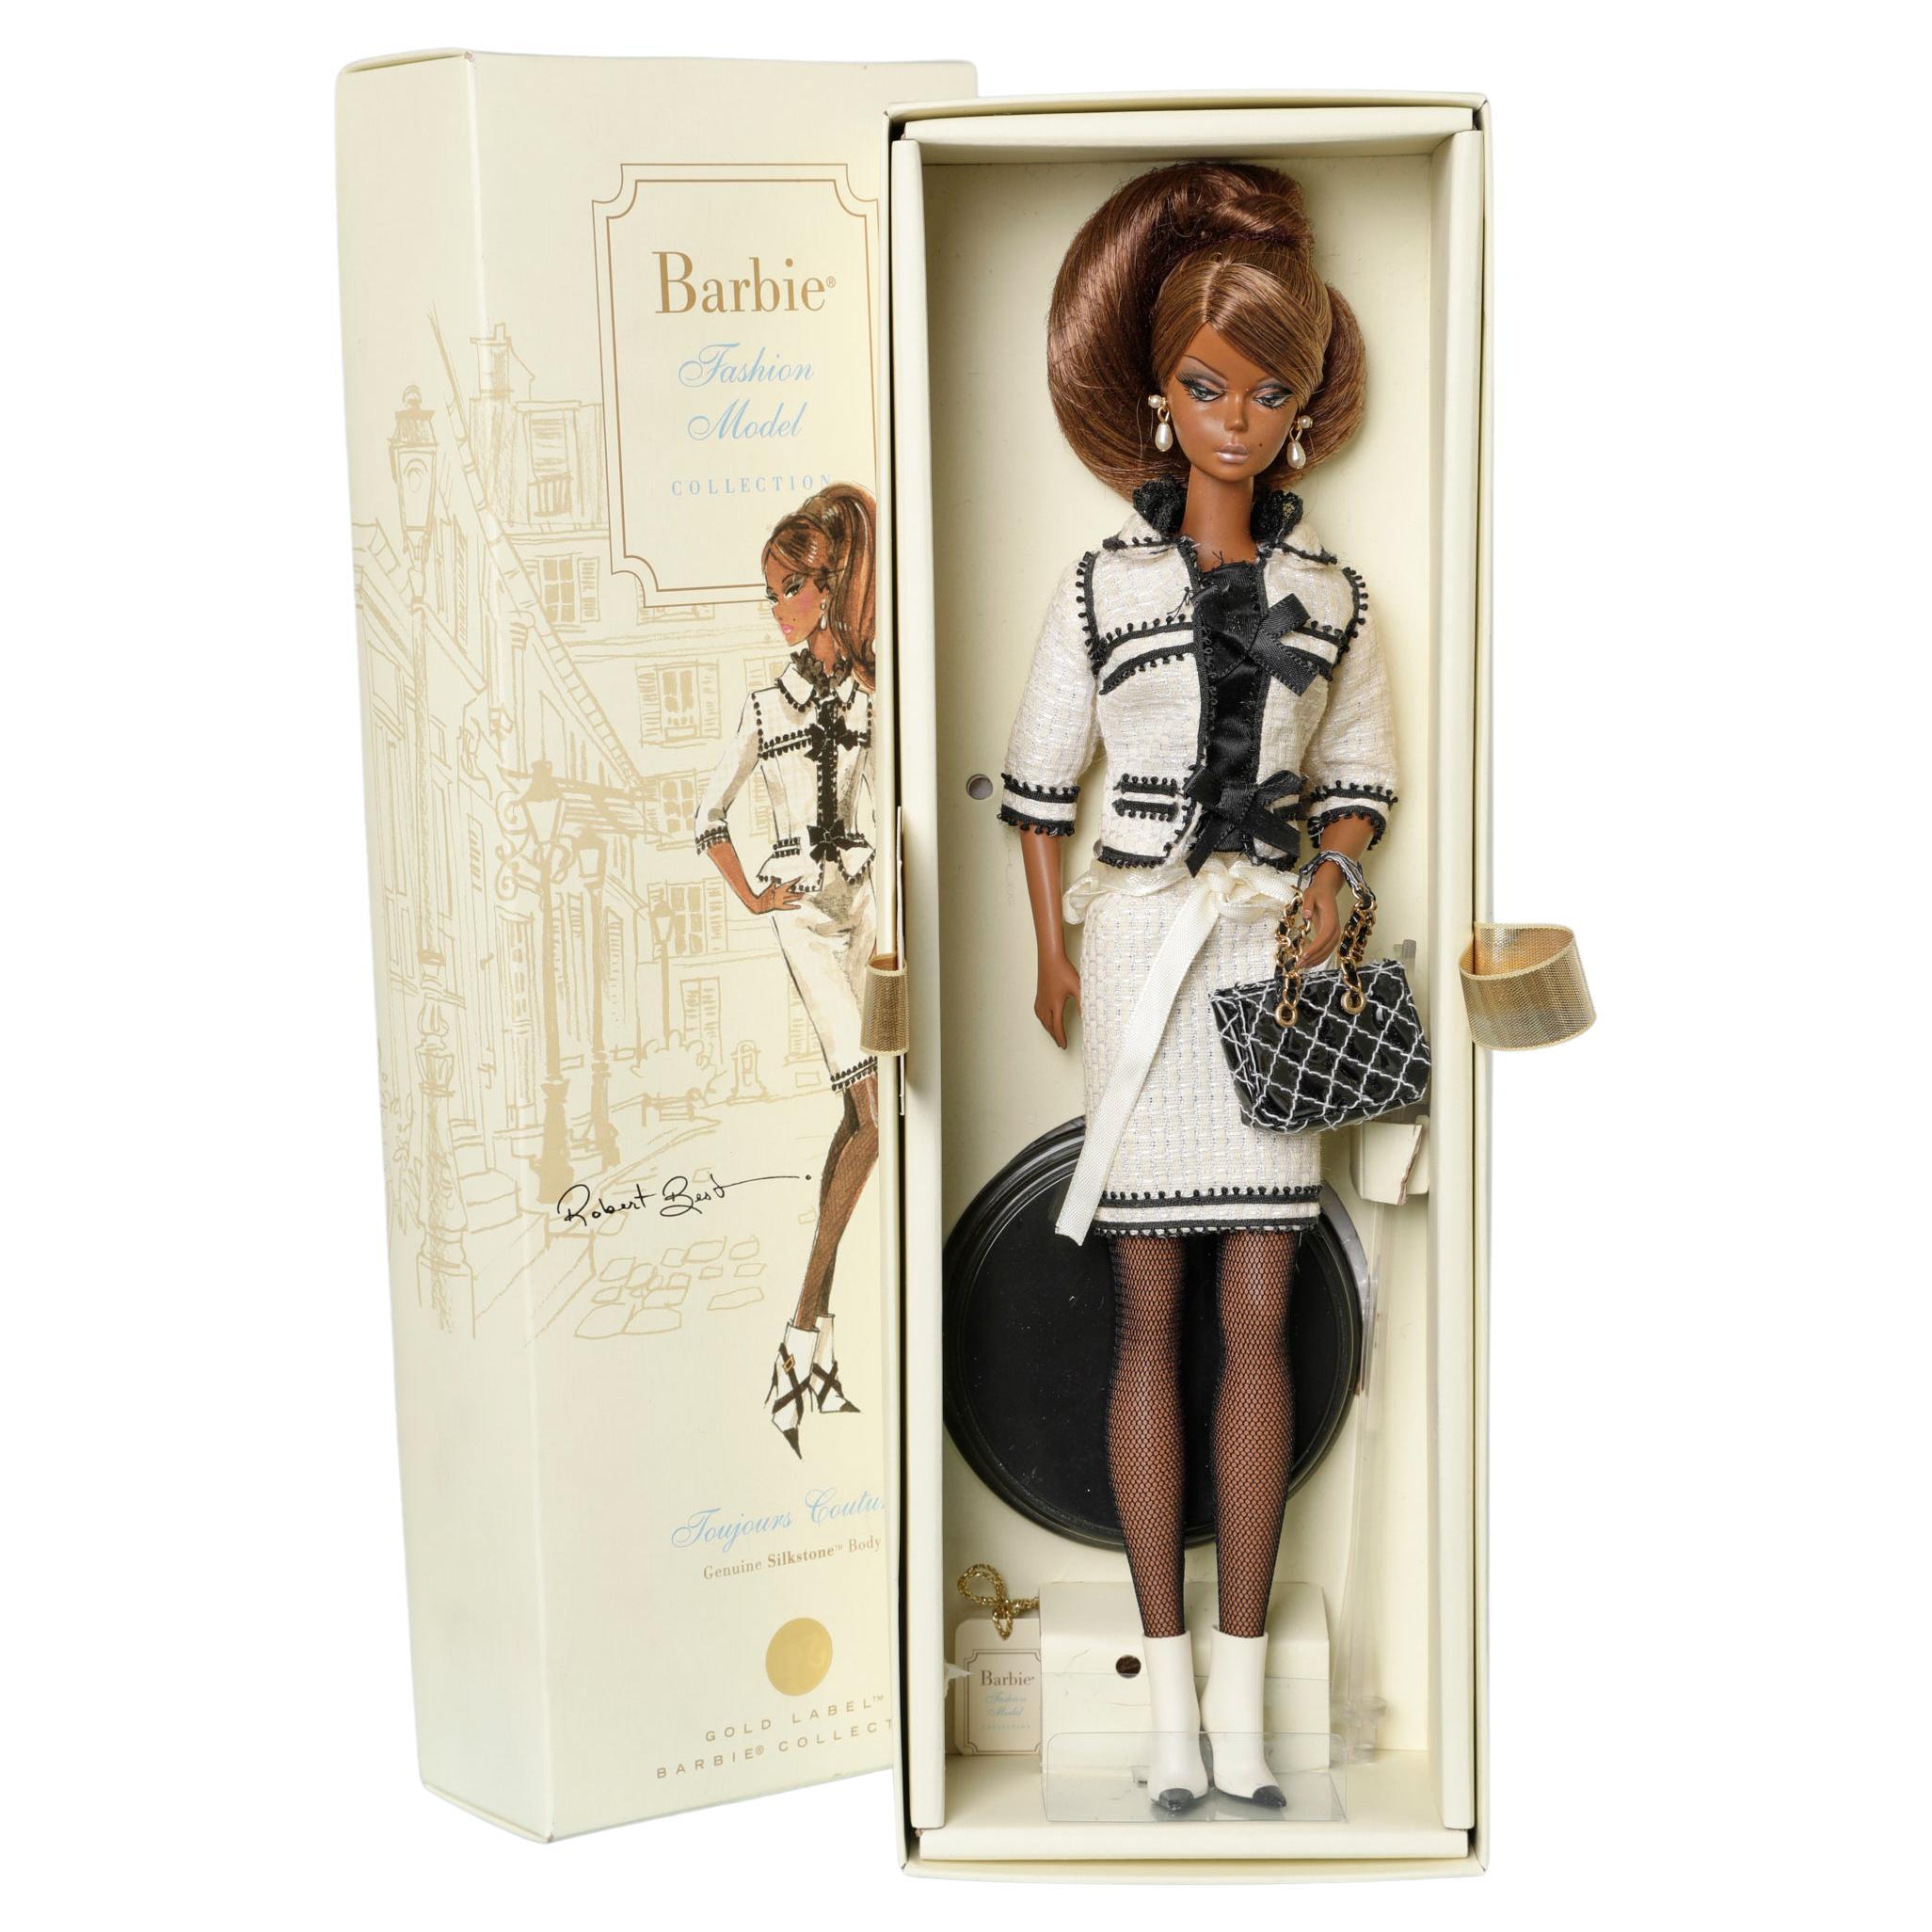 Toujours Couture " Barbie Fashion Model Gold Label Barbie Collector ( 2007)  For Sale at 1stDibs